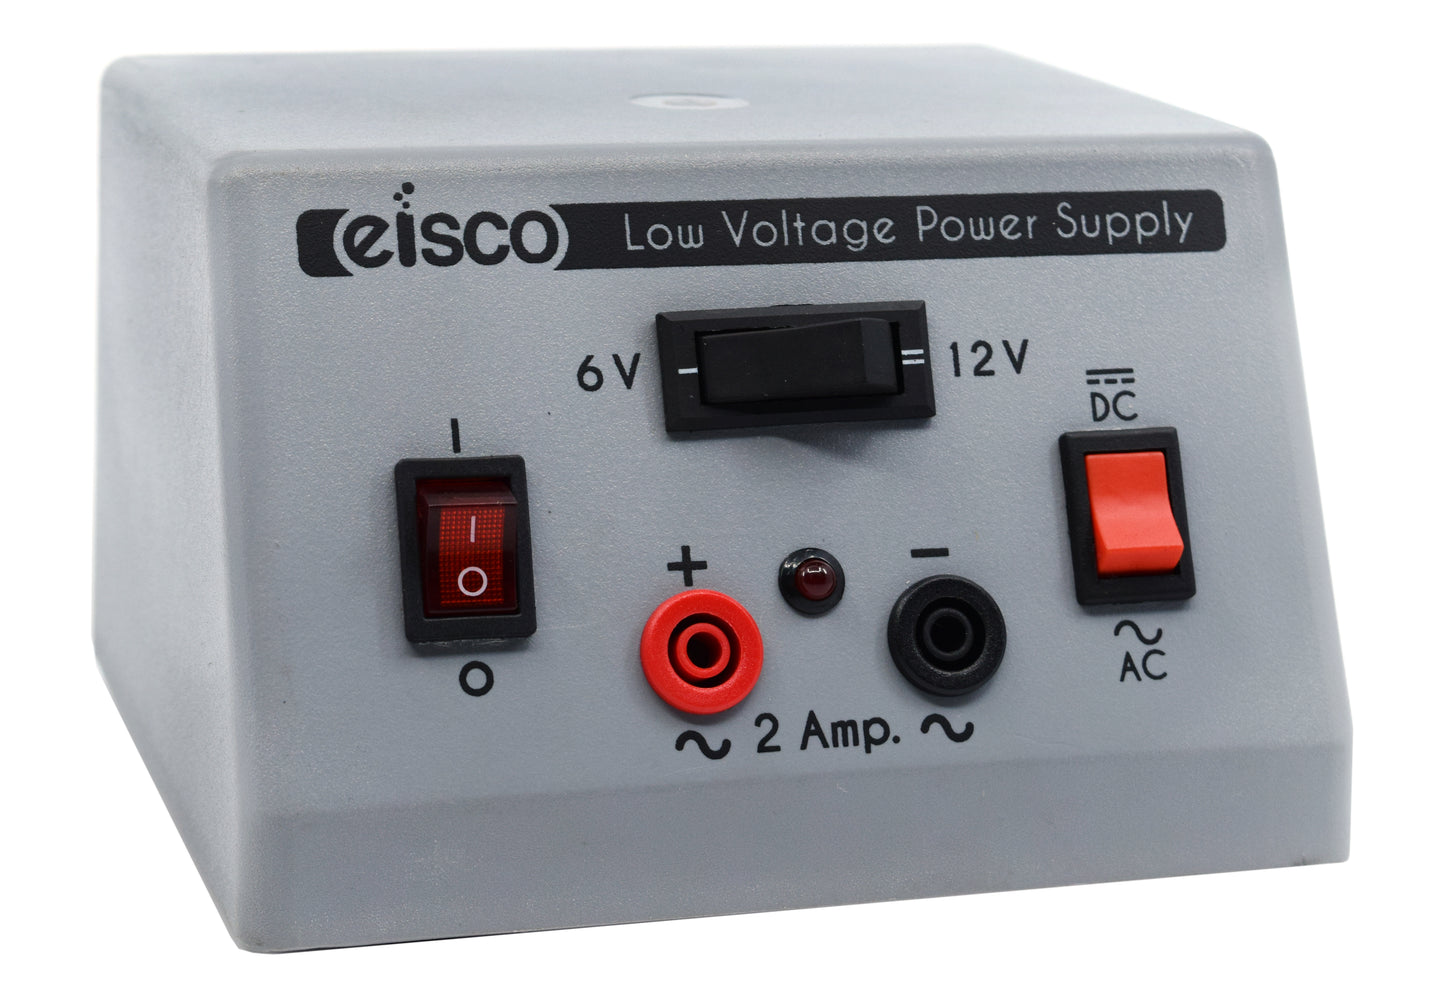 Low Voltage AC/DC Power Pack 6V/12V - 2 A - Includes Power Supply - Eisco Labs